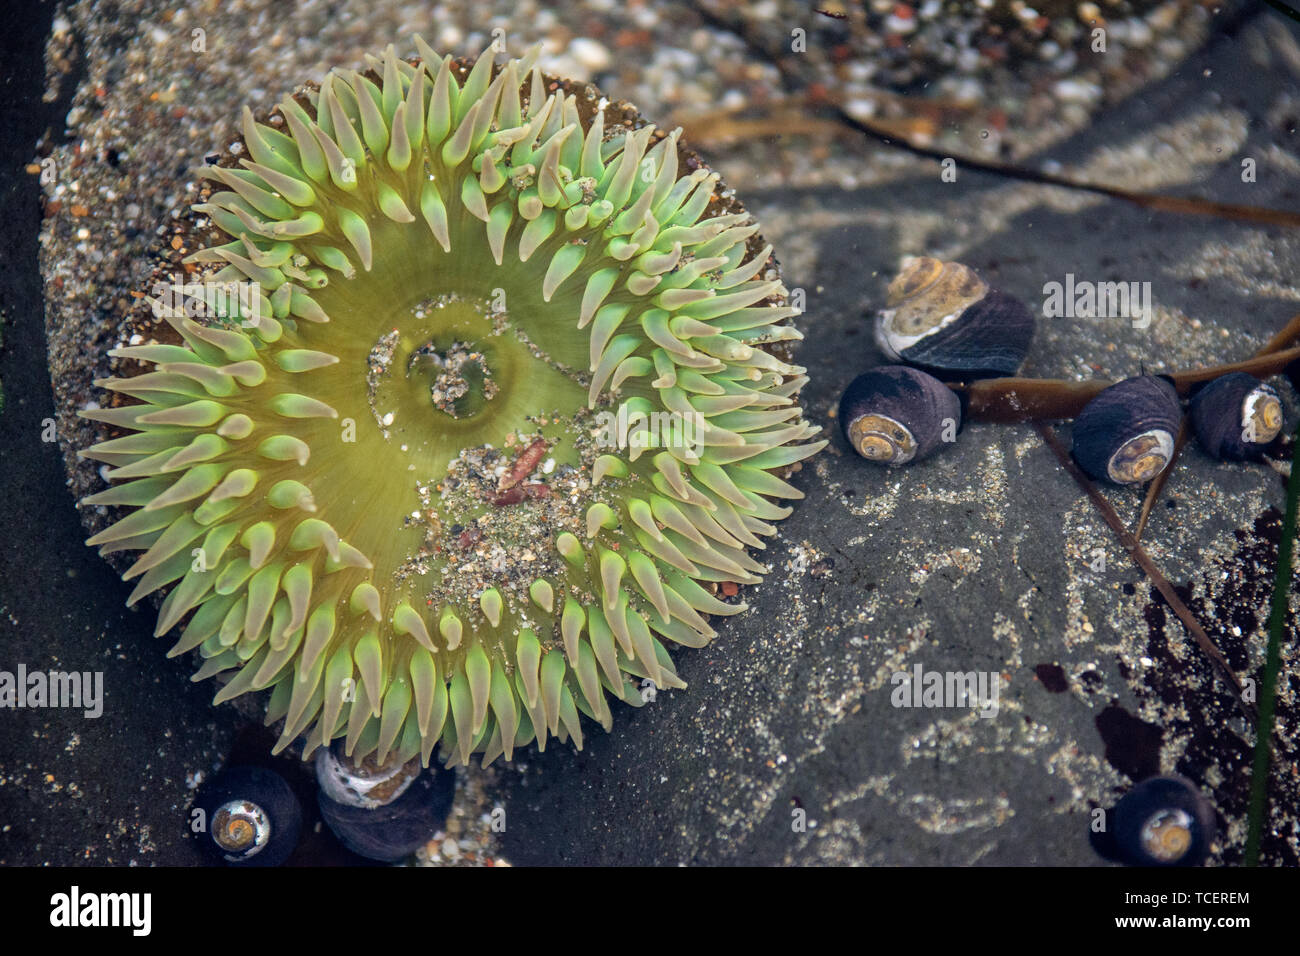 Close-up of big natural green anemone growing on rock with many seashells in water Stock Photo